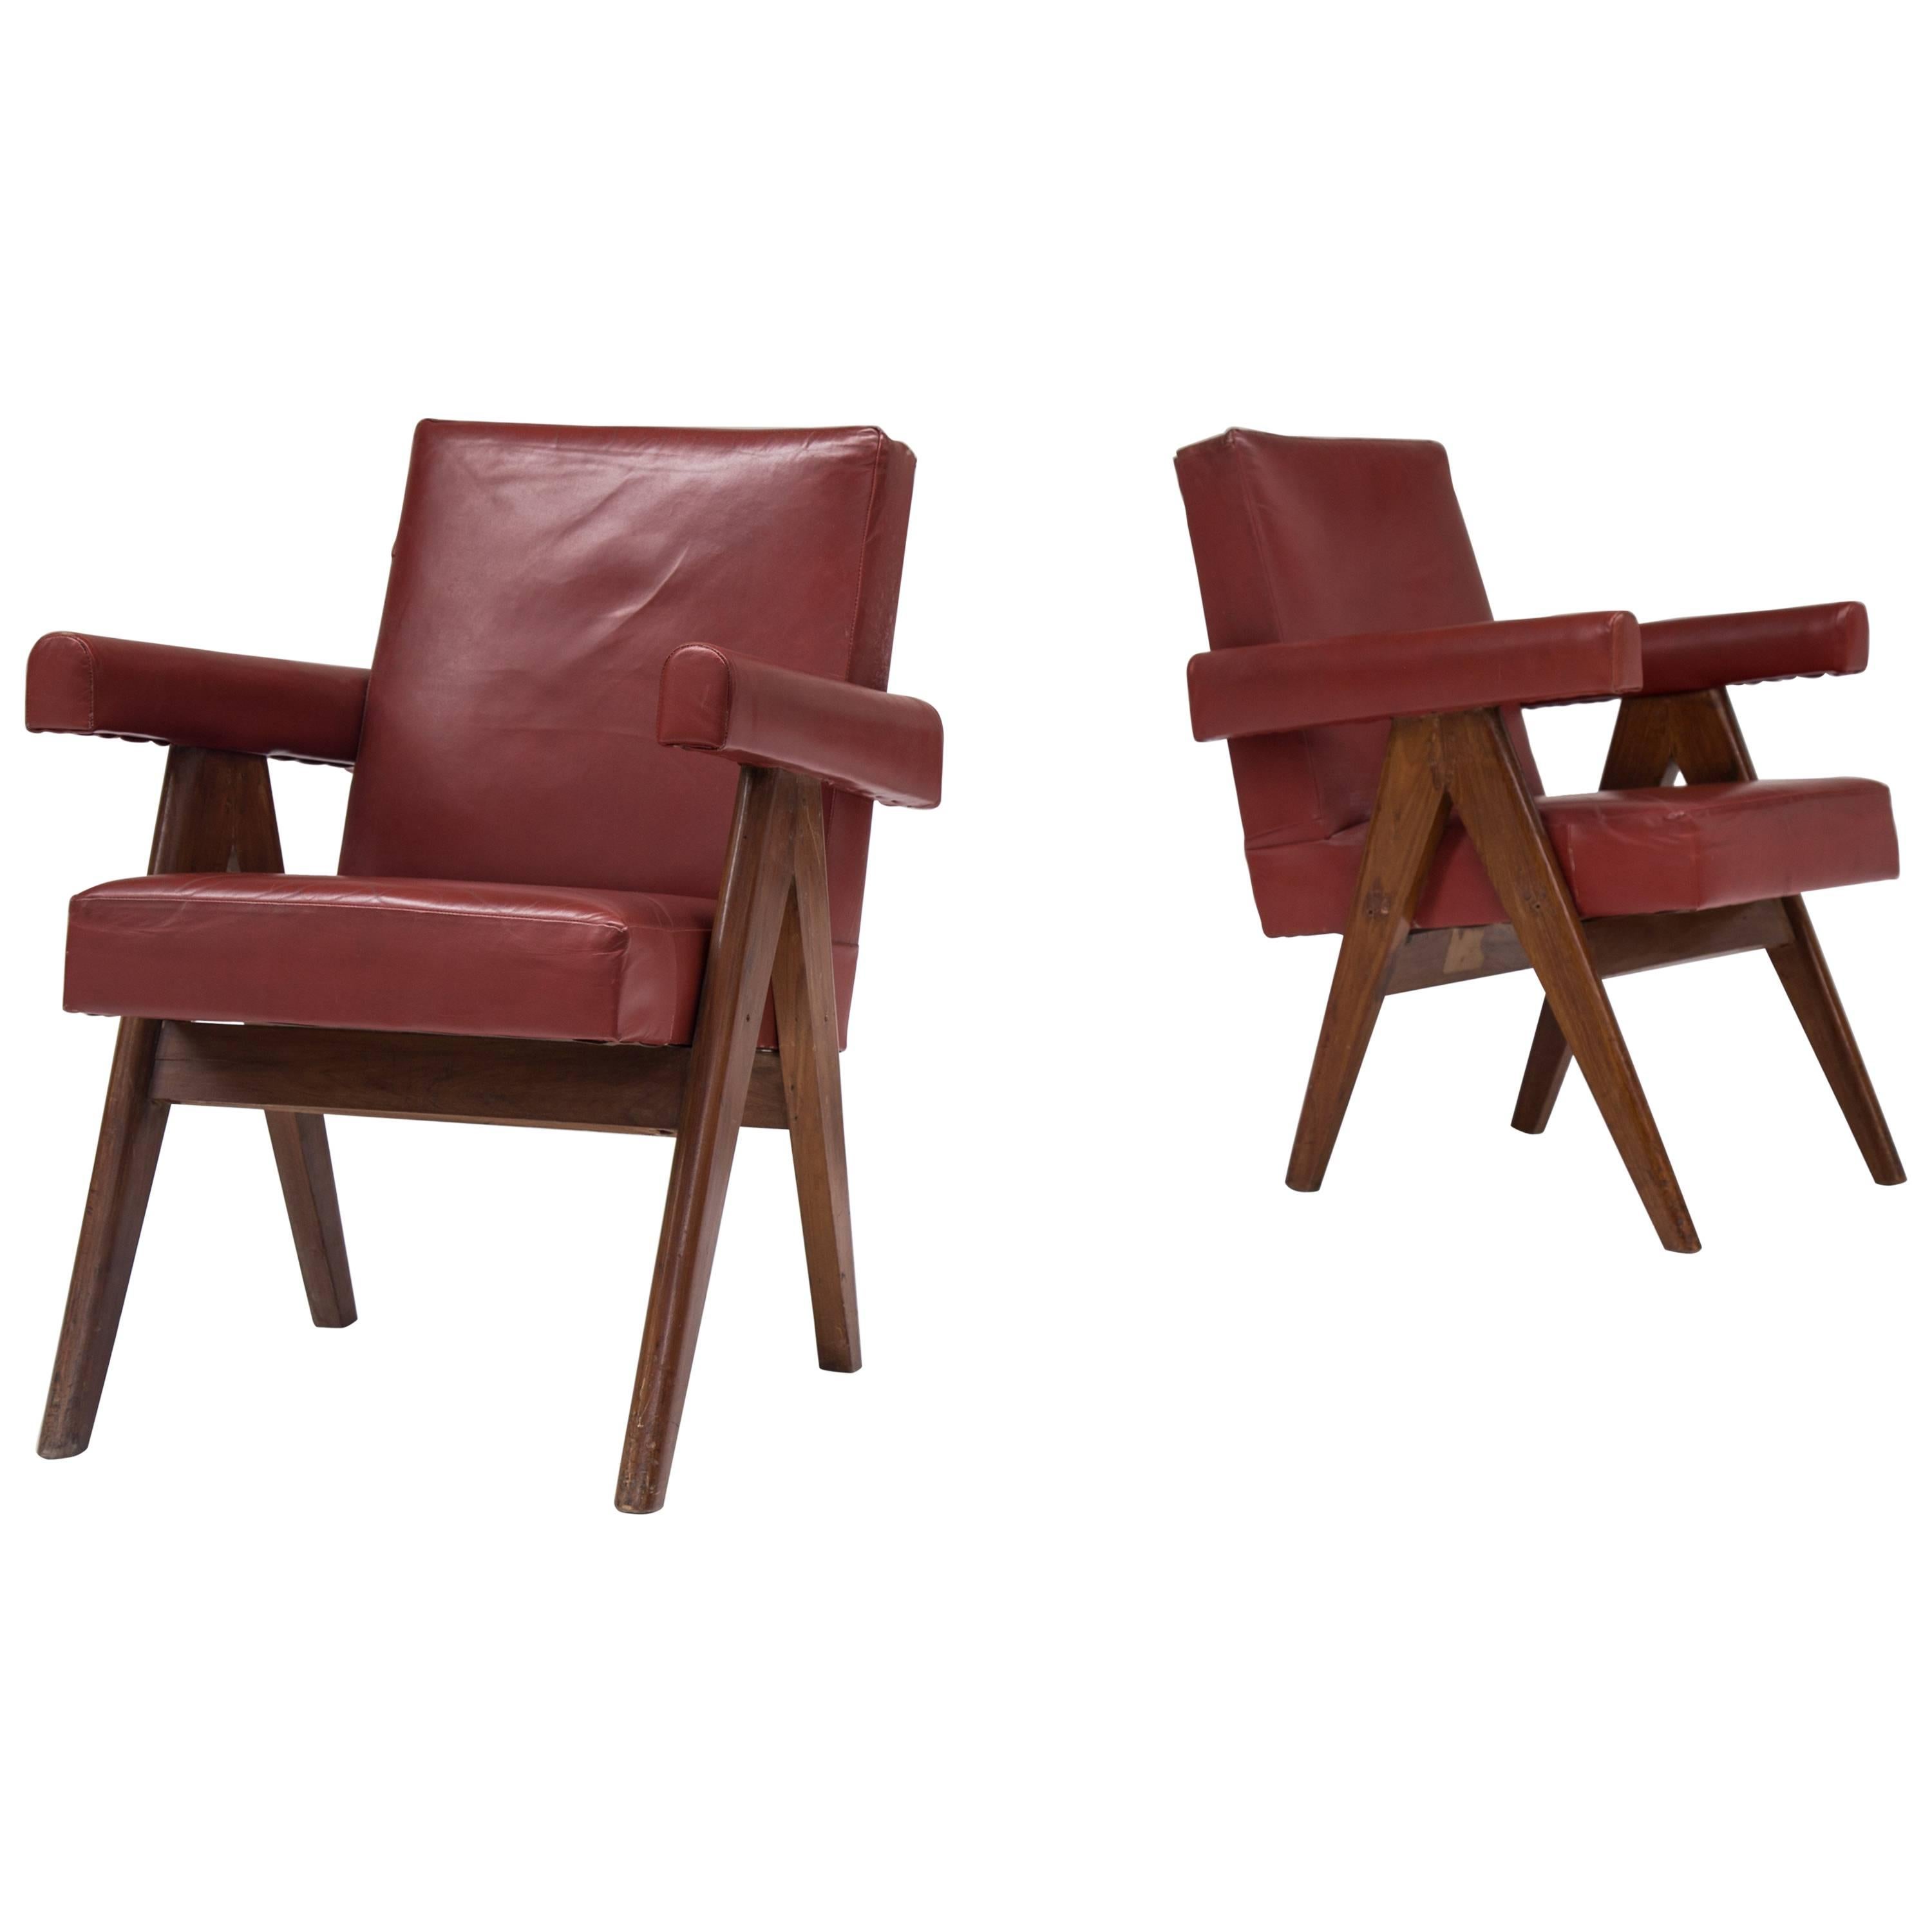 Pair of Pierre Jeanneret Chairs For Sale